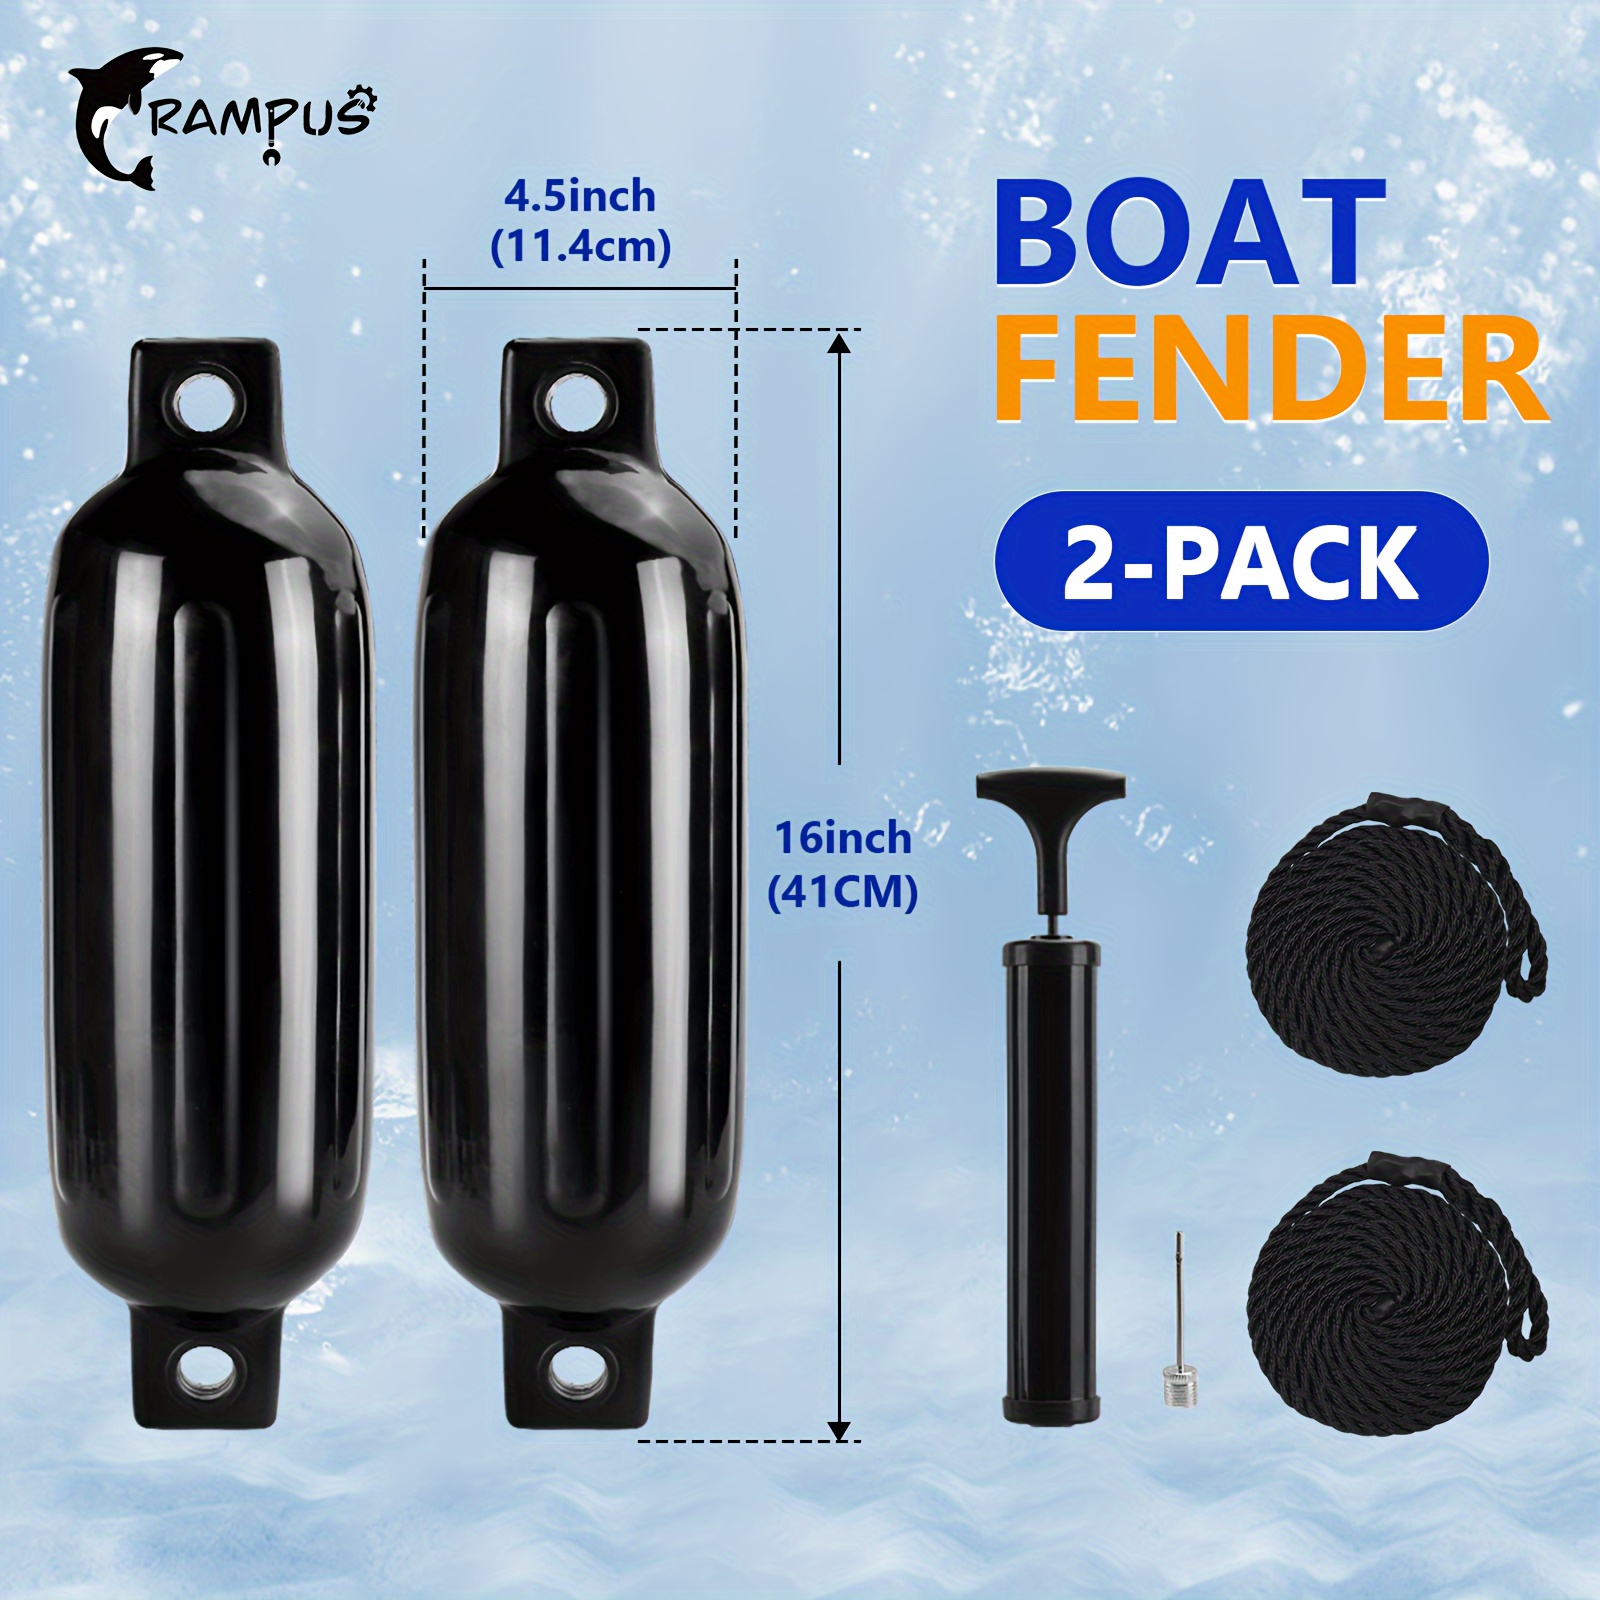 

Heavy Duty Marine Fender - Protect Your Boat From Damage With This Durable Bumper